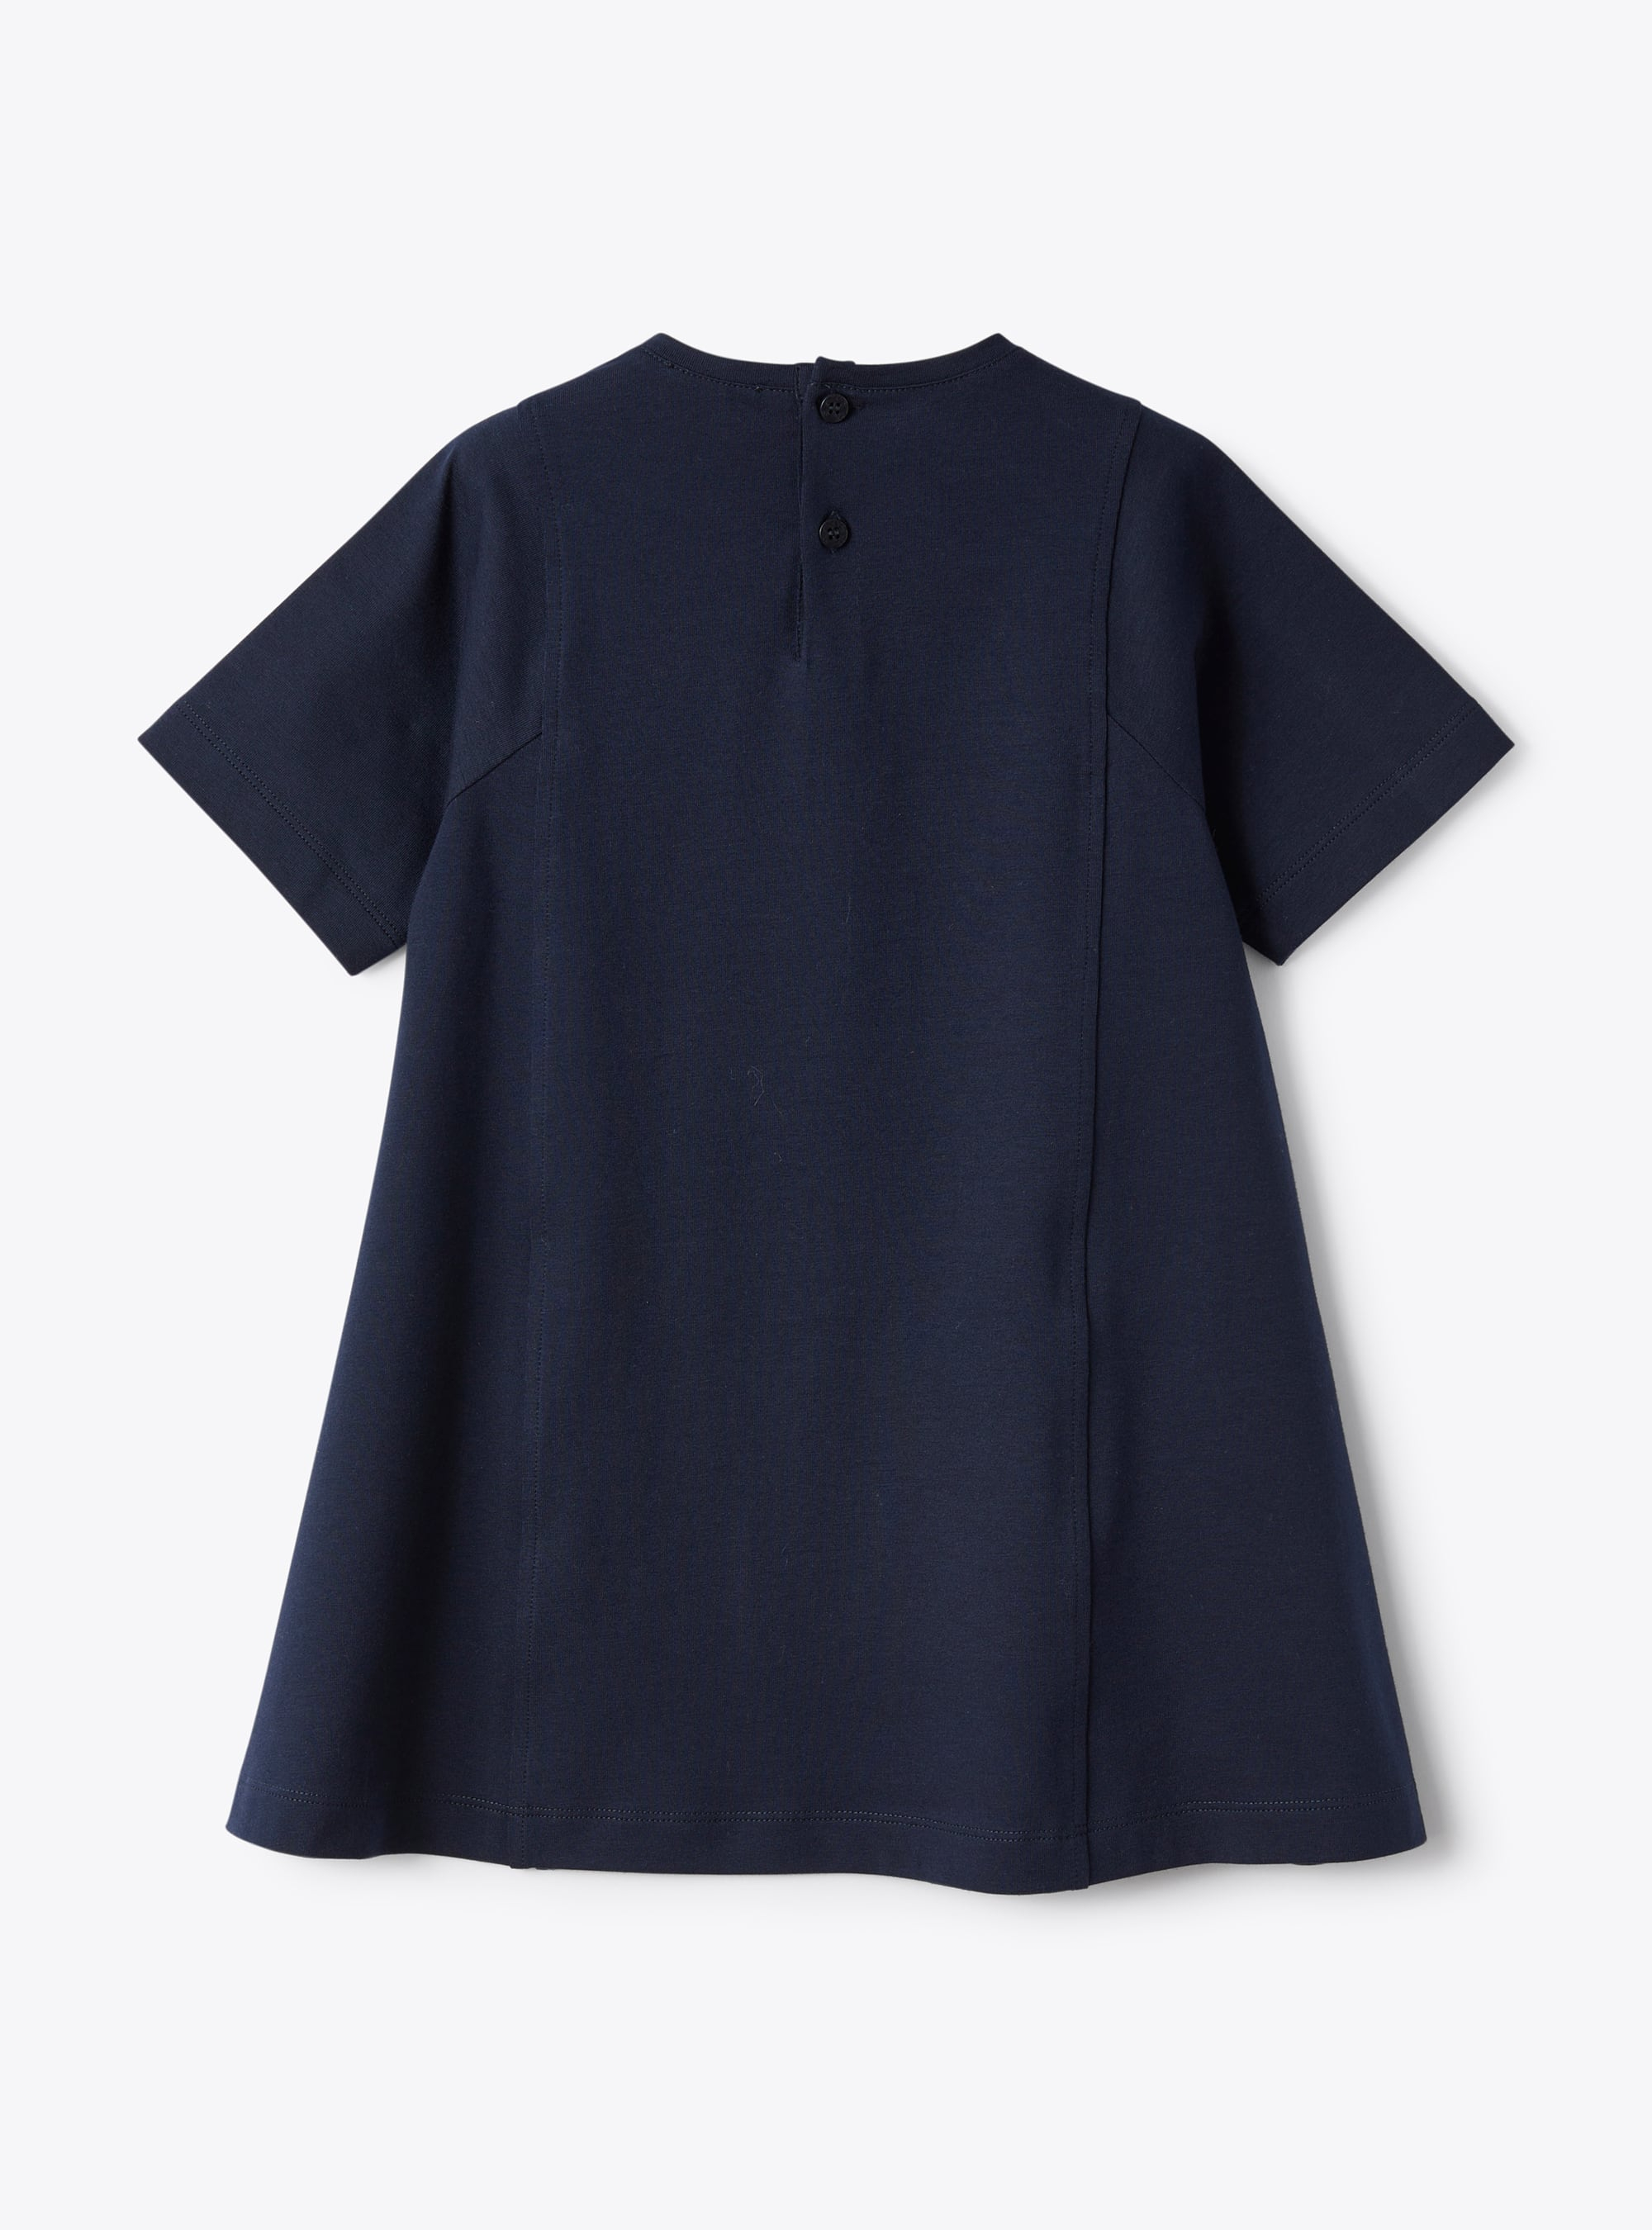 Short-sleeve dress in blue with bow detail  - Blue | Il Gufo